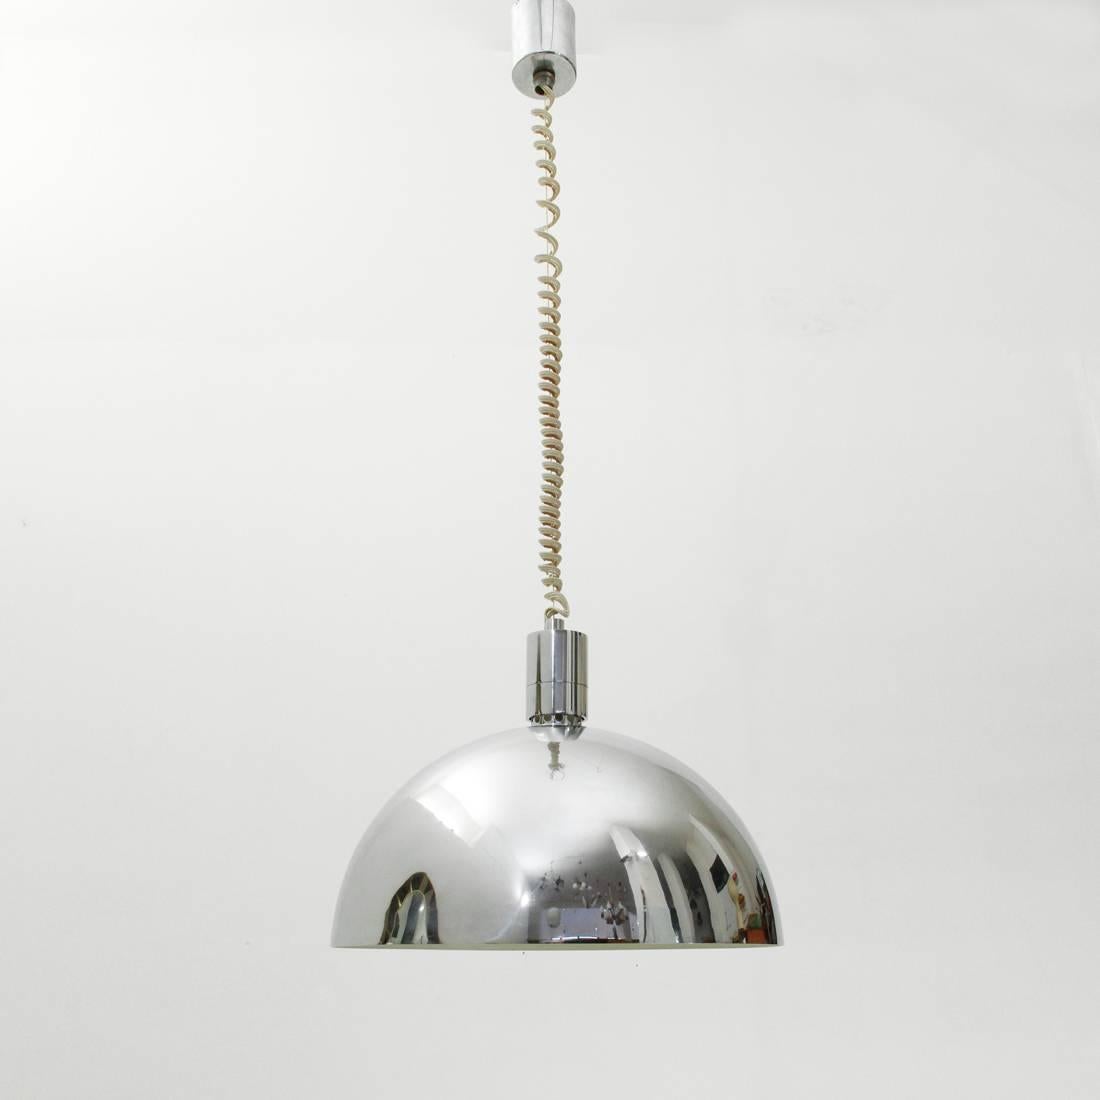 Pendant lamp produced by Sirrah on a project by Franco Albini since 1969.
Rosette and diffuser in chromed metal. White painted diffuser interior.
Adjustable height of the wire.
Good general conditions, some signs due to normal use over